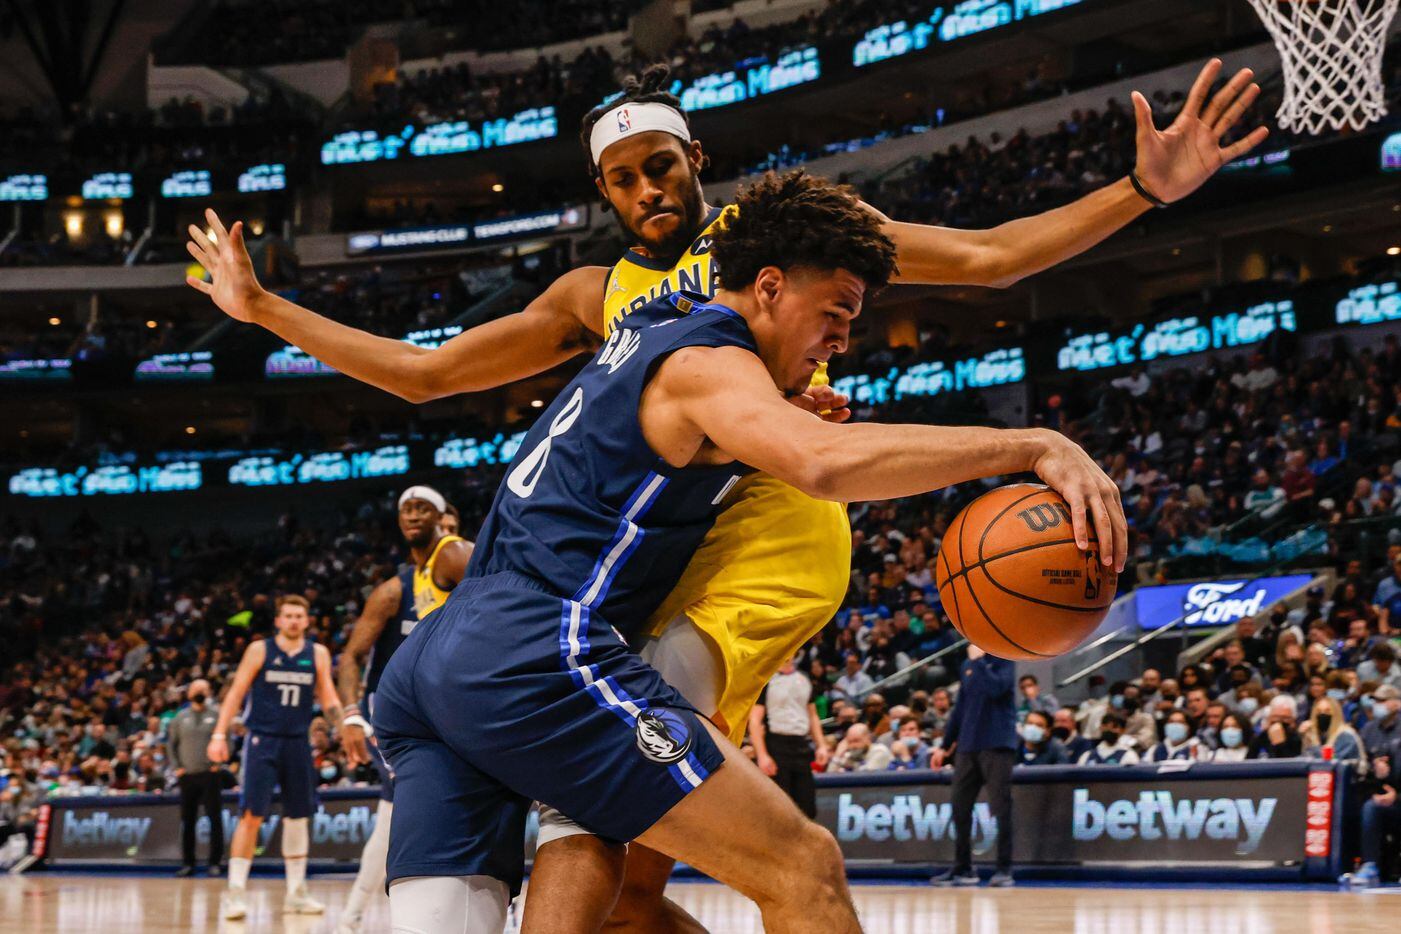 Dallas Mavericks forward George King (8) drives to the basket as Indiana Pacers forward Isaiah Jackson (23) tries to block him during the second half at the American Airlines Center in Dallas on Saturday, January 29, 2022.